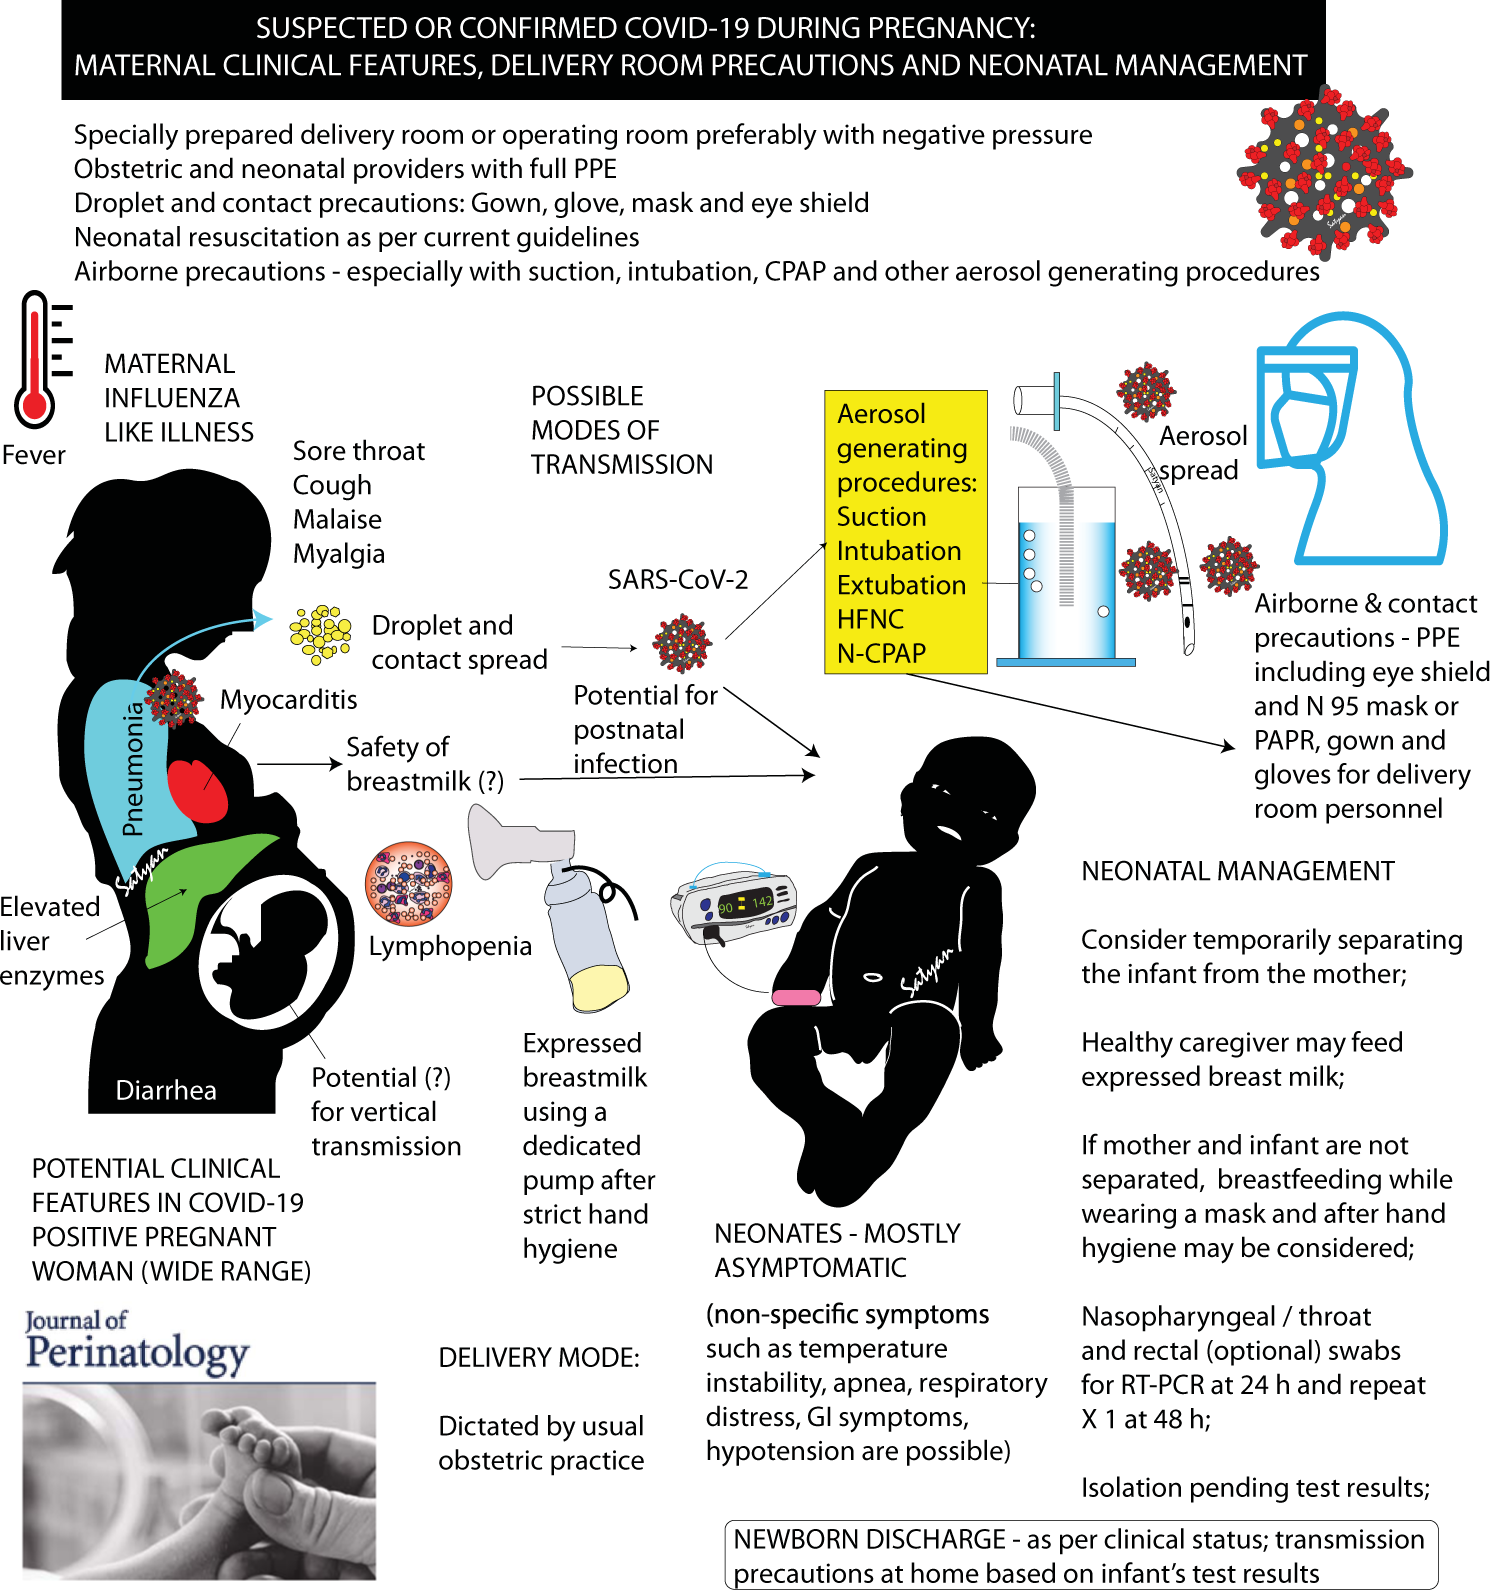 Early pregnancy explained: An illustrated guide : Shots - Health News : NPR